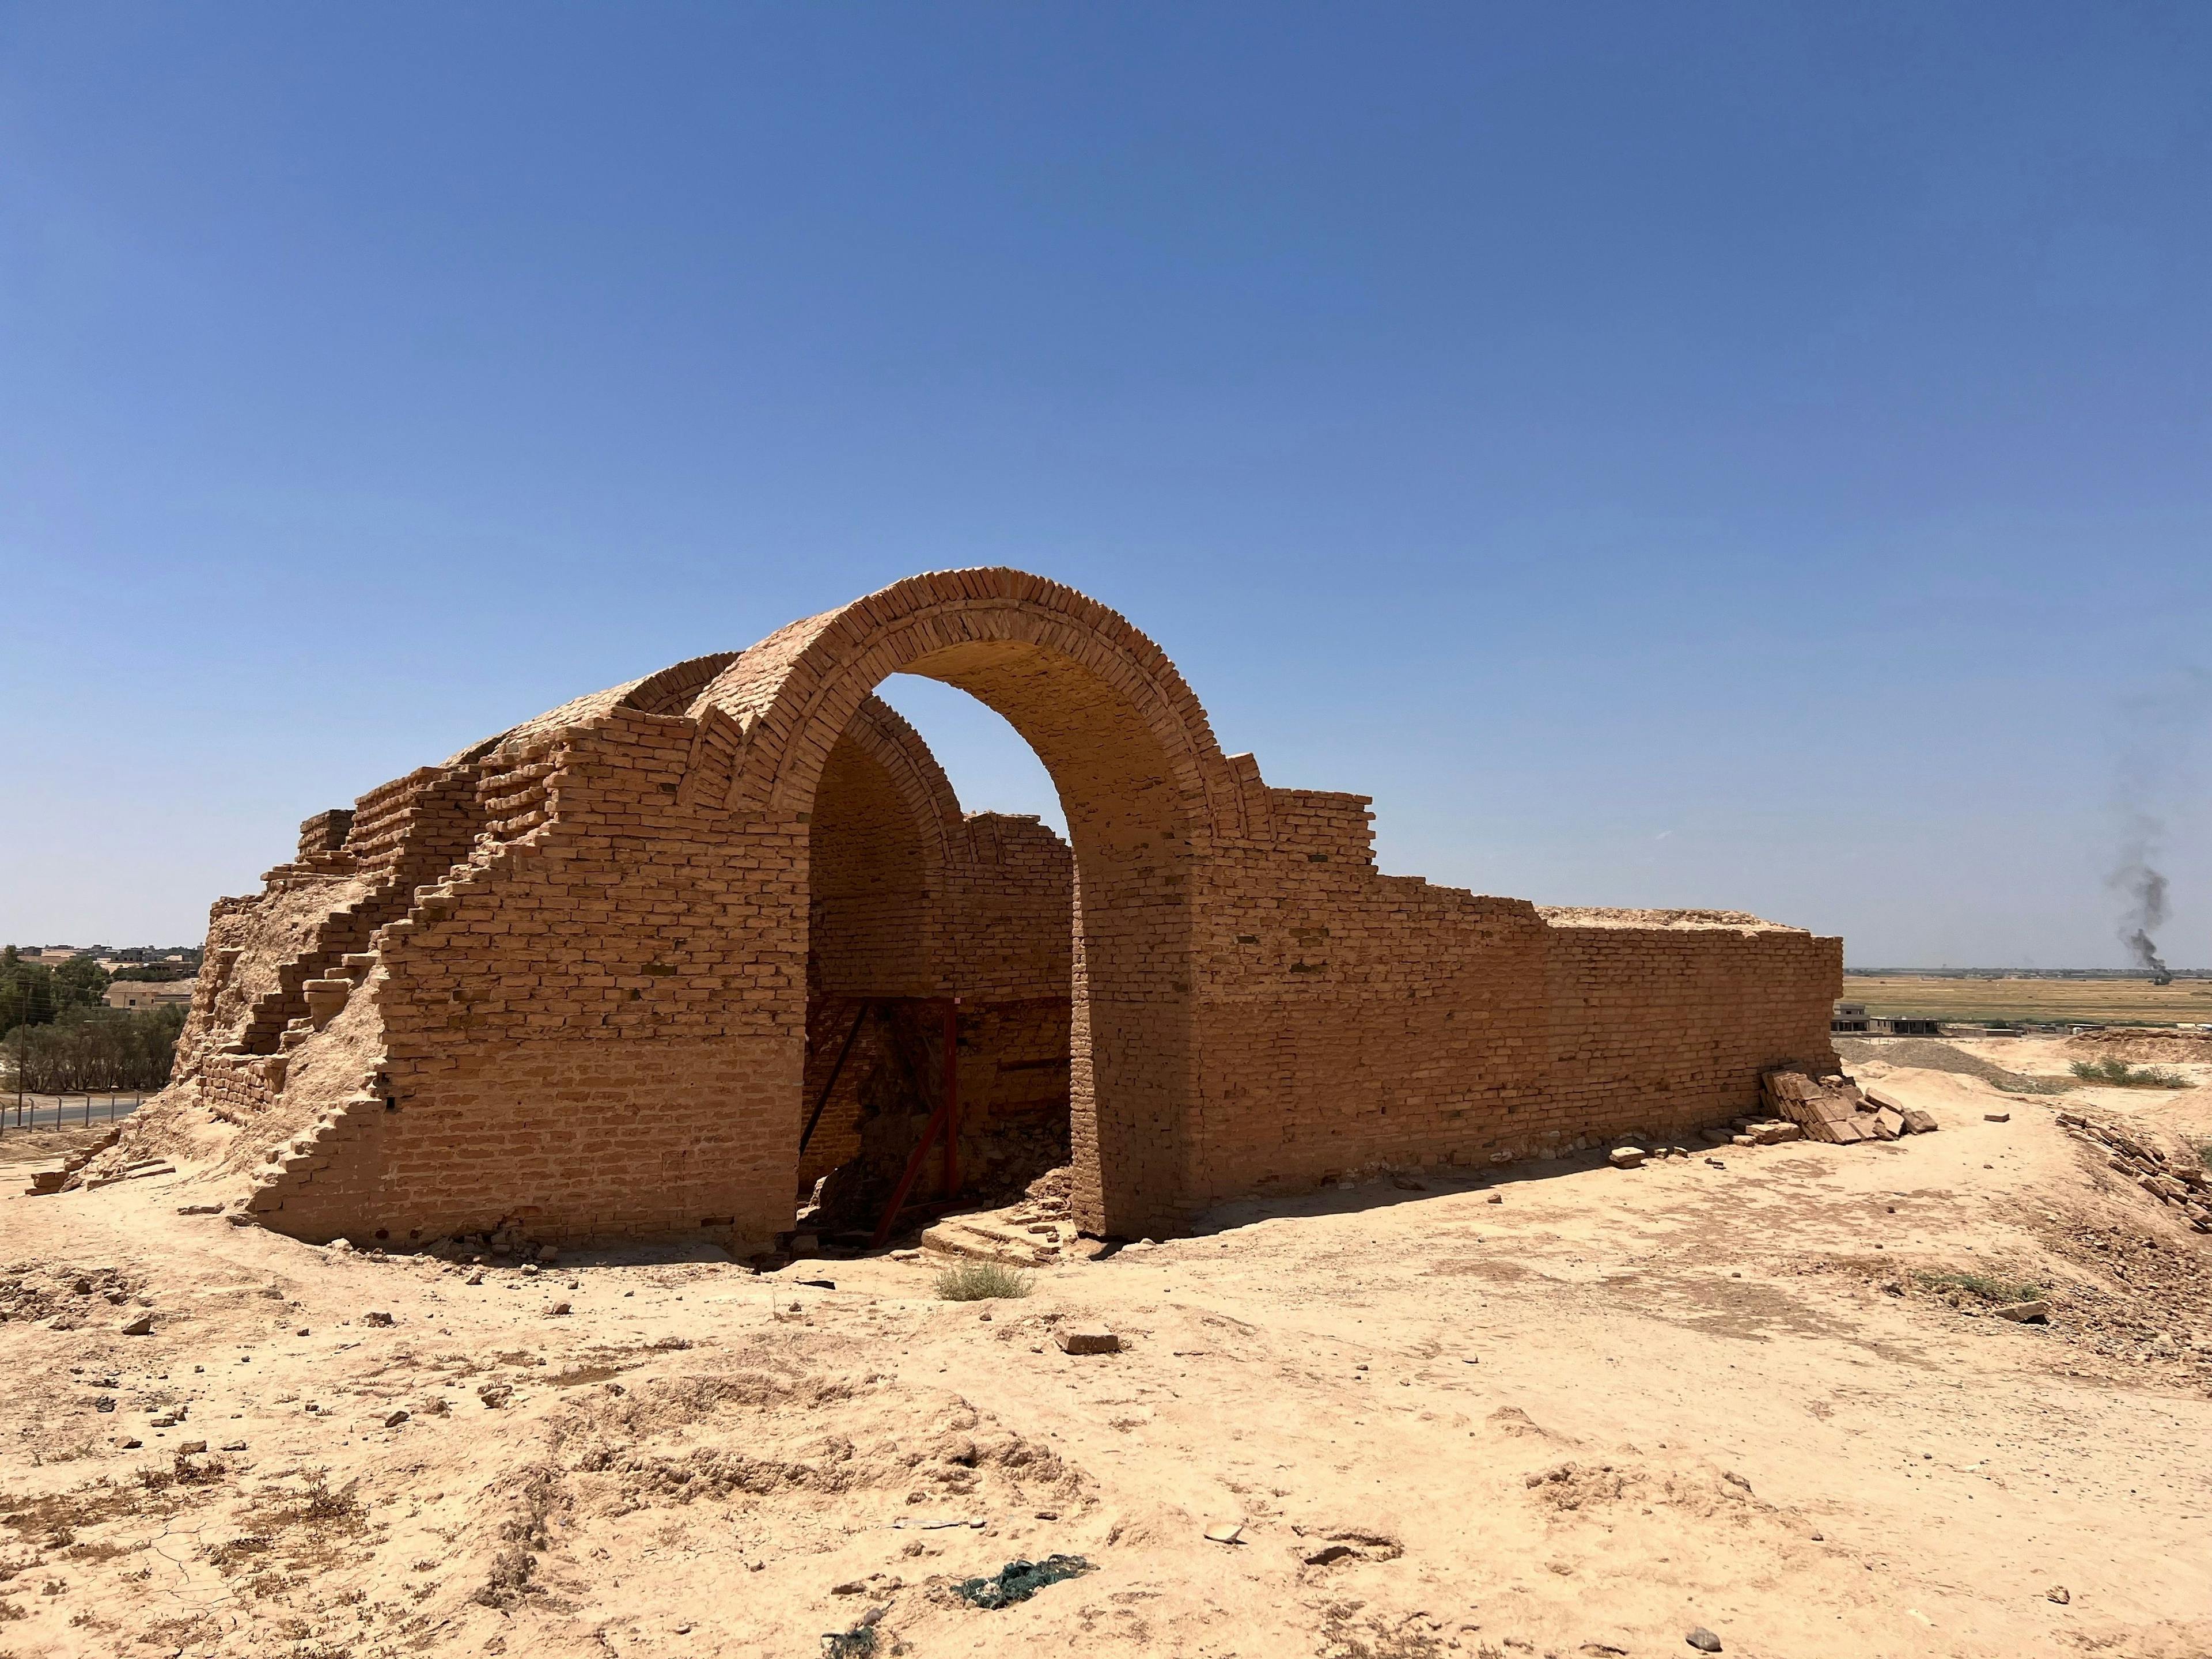 Ashur (Qal'at Sherqat), Assyria Historical city, Ninawah Iraq، it was a major ancient Mesopotamian civilization which existed as a city-state from the 21st century BC to the 14th century BC | Image Credit: © humam - stock.adobe.com